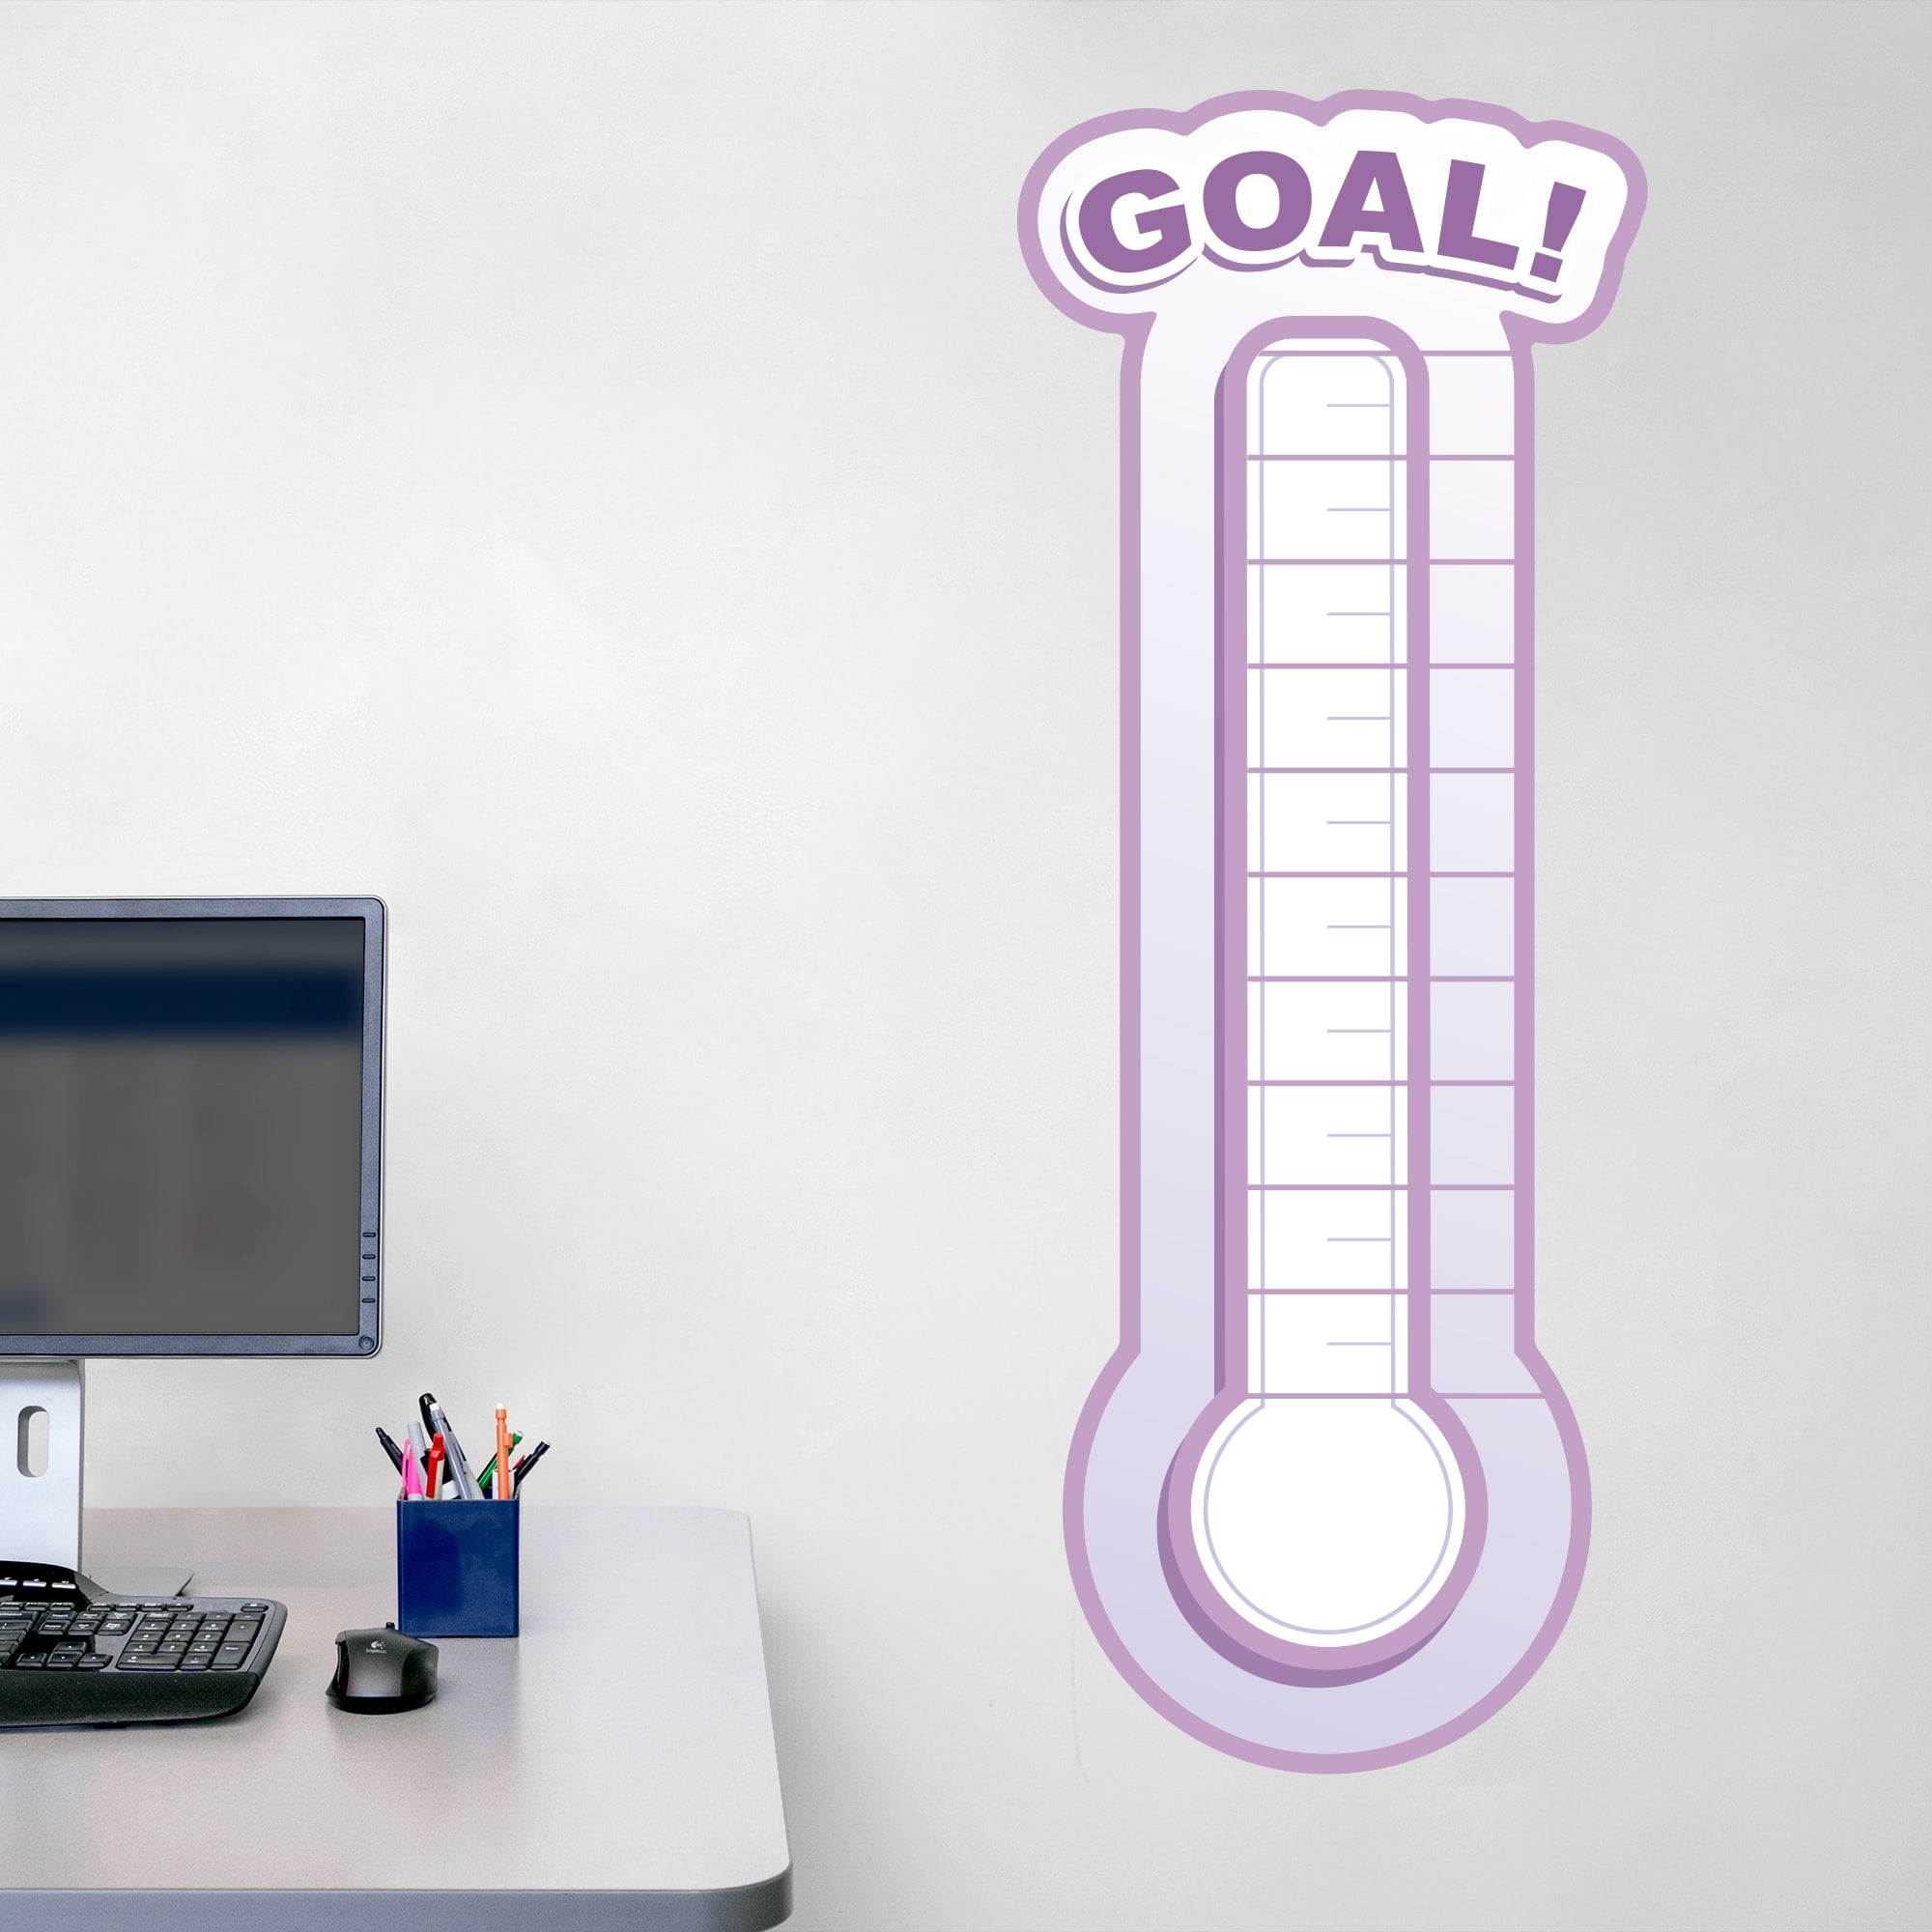 Goal Thermometer - Removable Dry Erase Vinyl Decal in Purple (17.5"W x 46.8"H) by Fathead